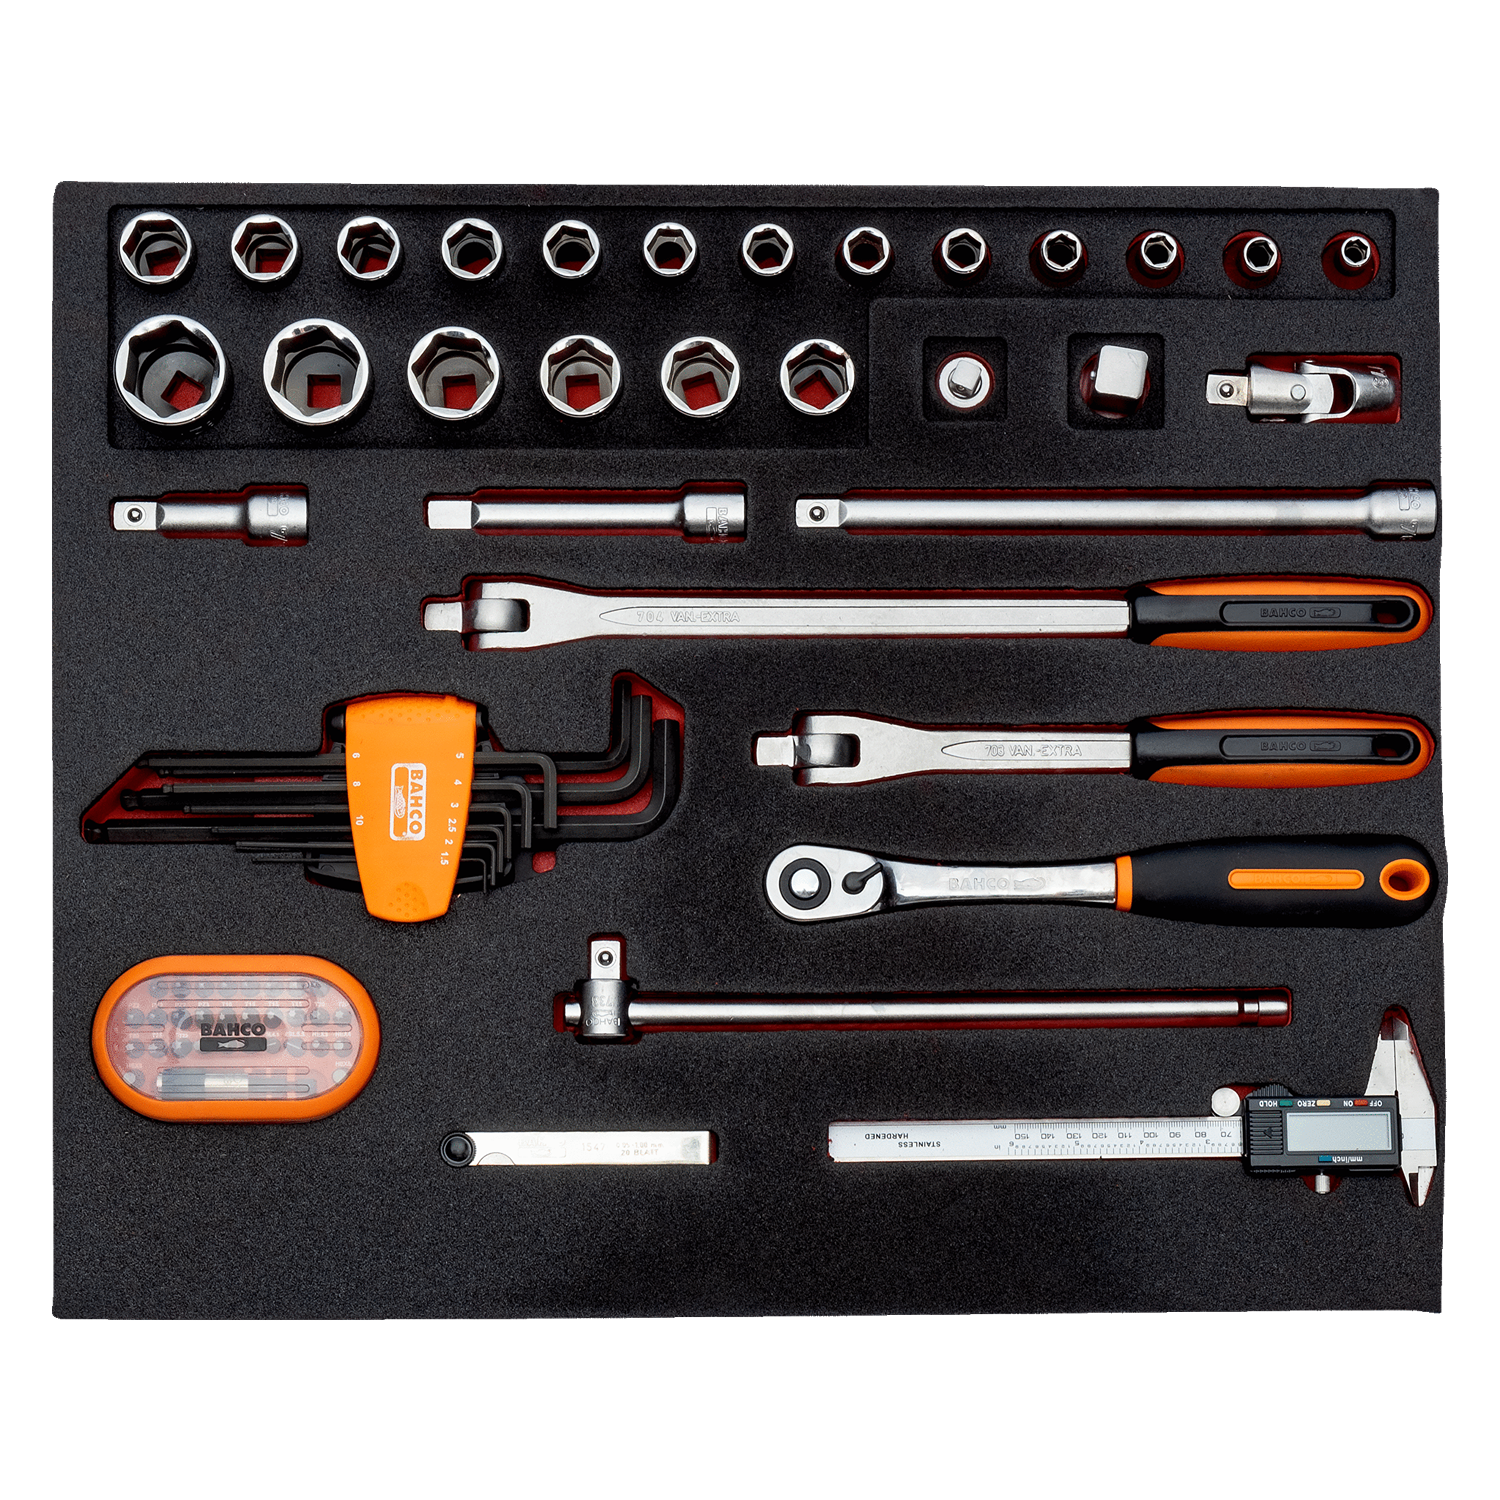 BAHCO FF1A142 Fit&Go 3/3 Foam Wrench and Screwdriver Bit Set 71Pc - Premium Wrench and Screwdriver Bit Set from BAHCO - Shop now at Yew Aik.